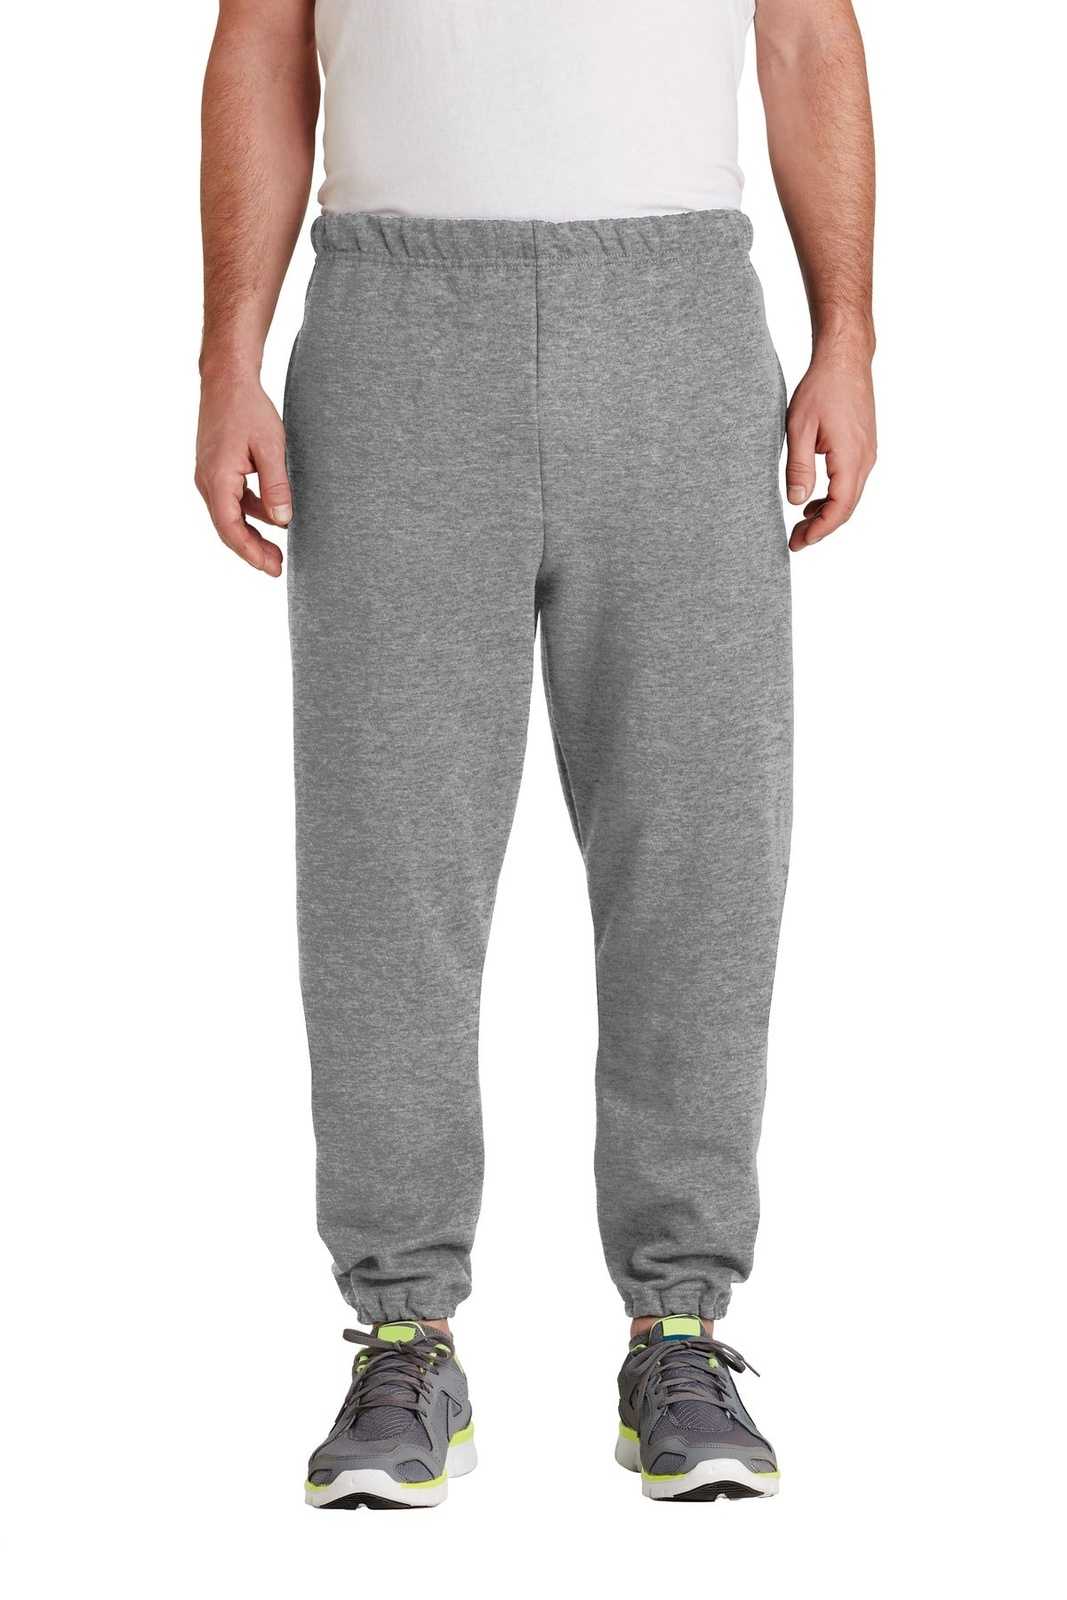 Jerzees 4850MP Super Sweats Nublend Sweatpant with Pockets - Oxford - HIT a Double